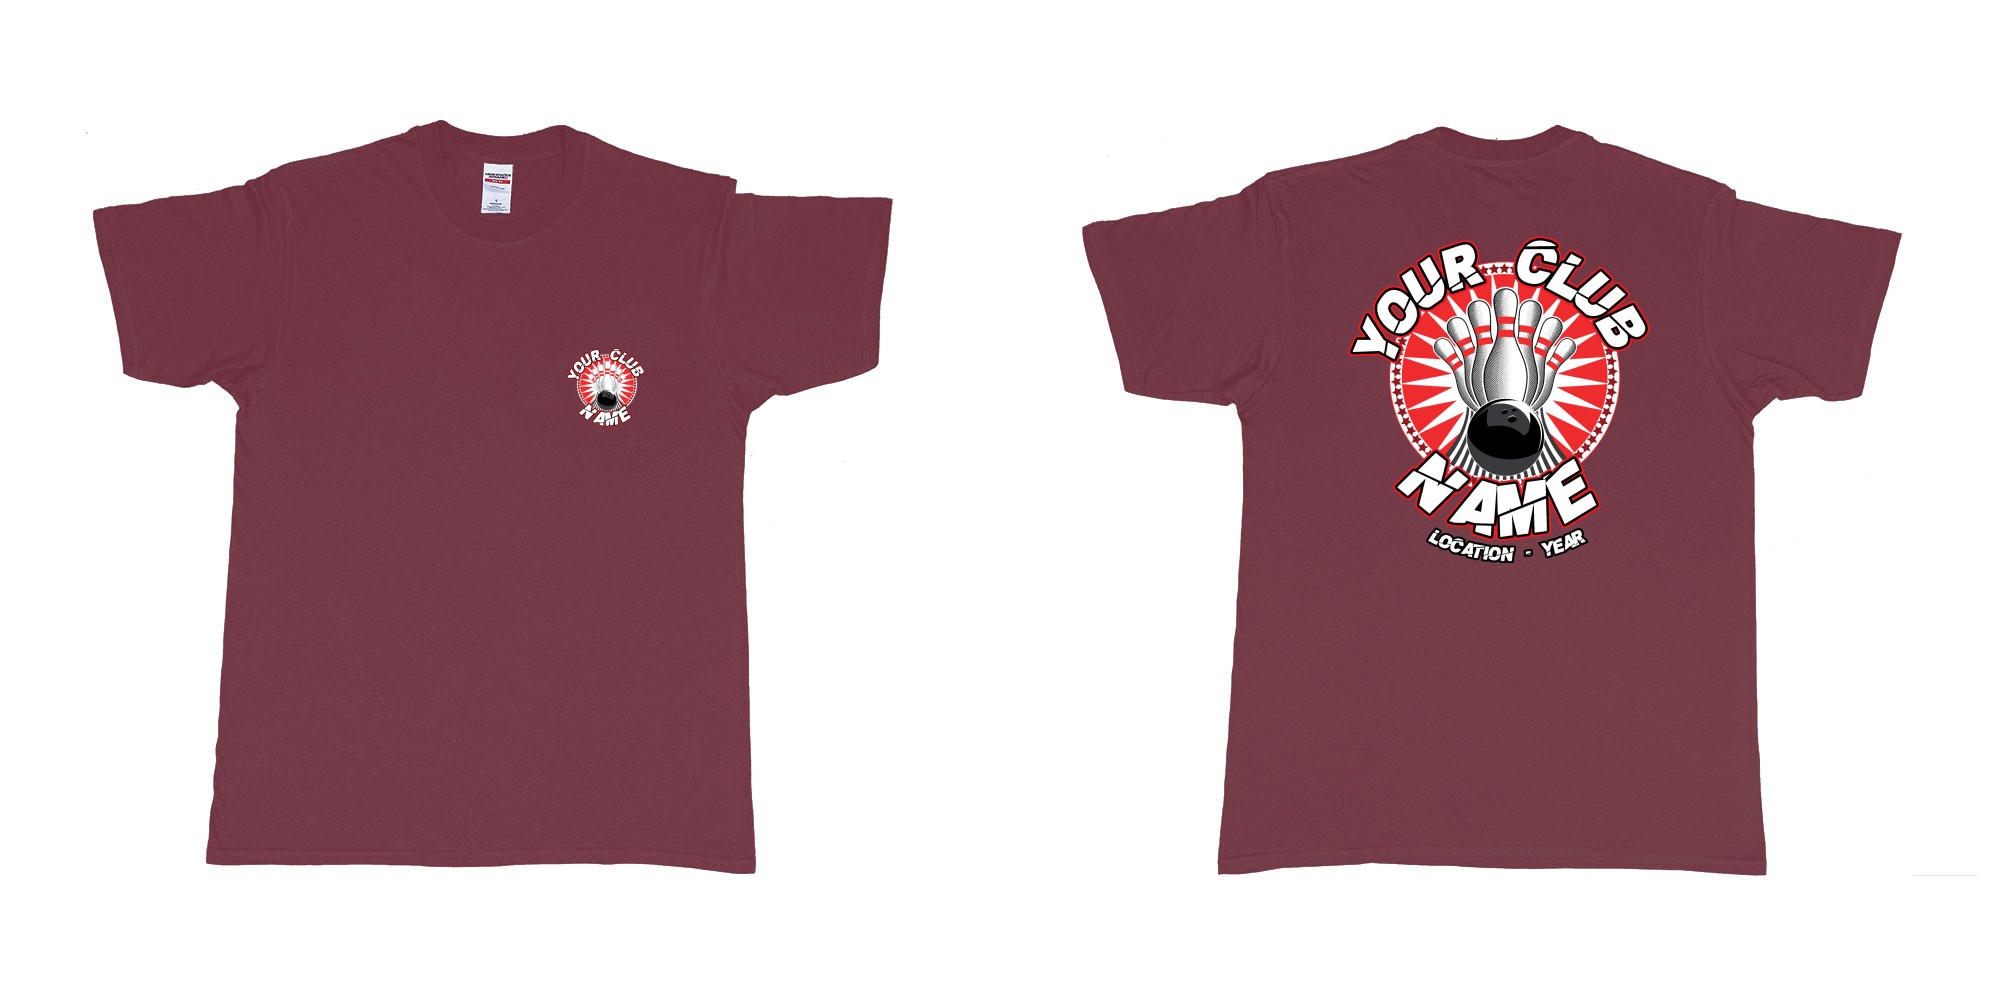 Custom tshirt design TPW strike bowling in fabric color marron choice your own text made in Bali by The Pirate Way